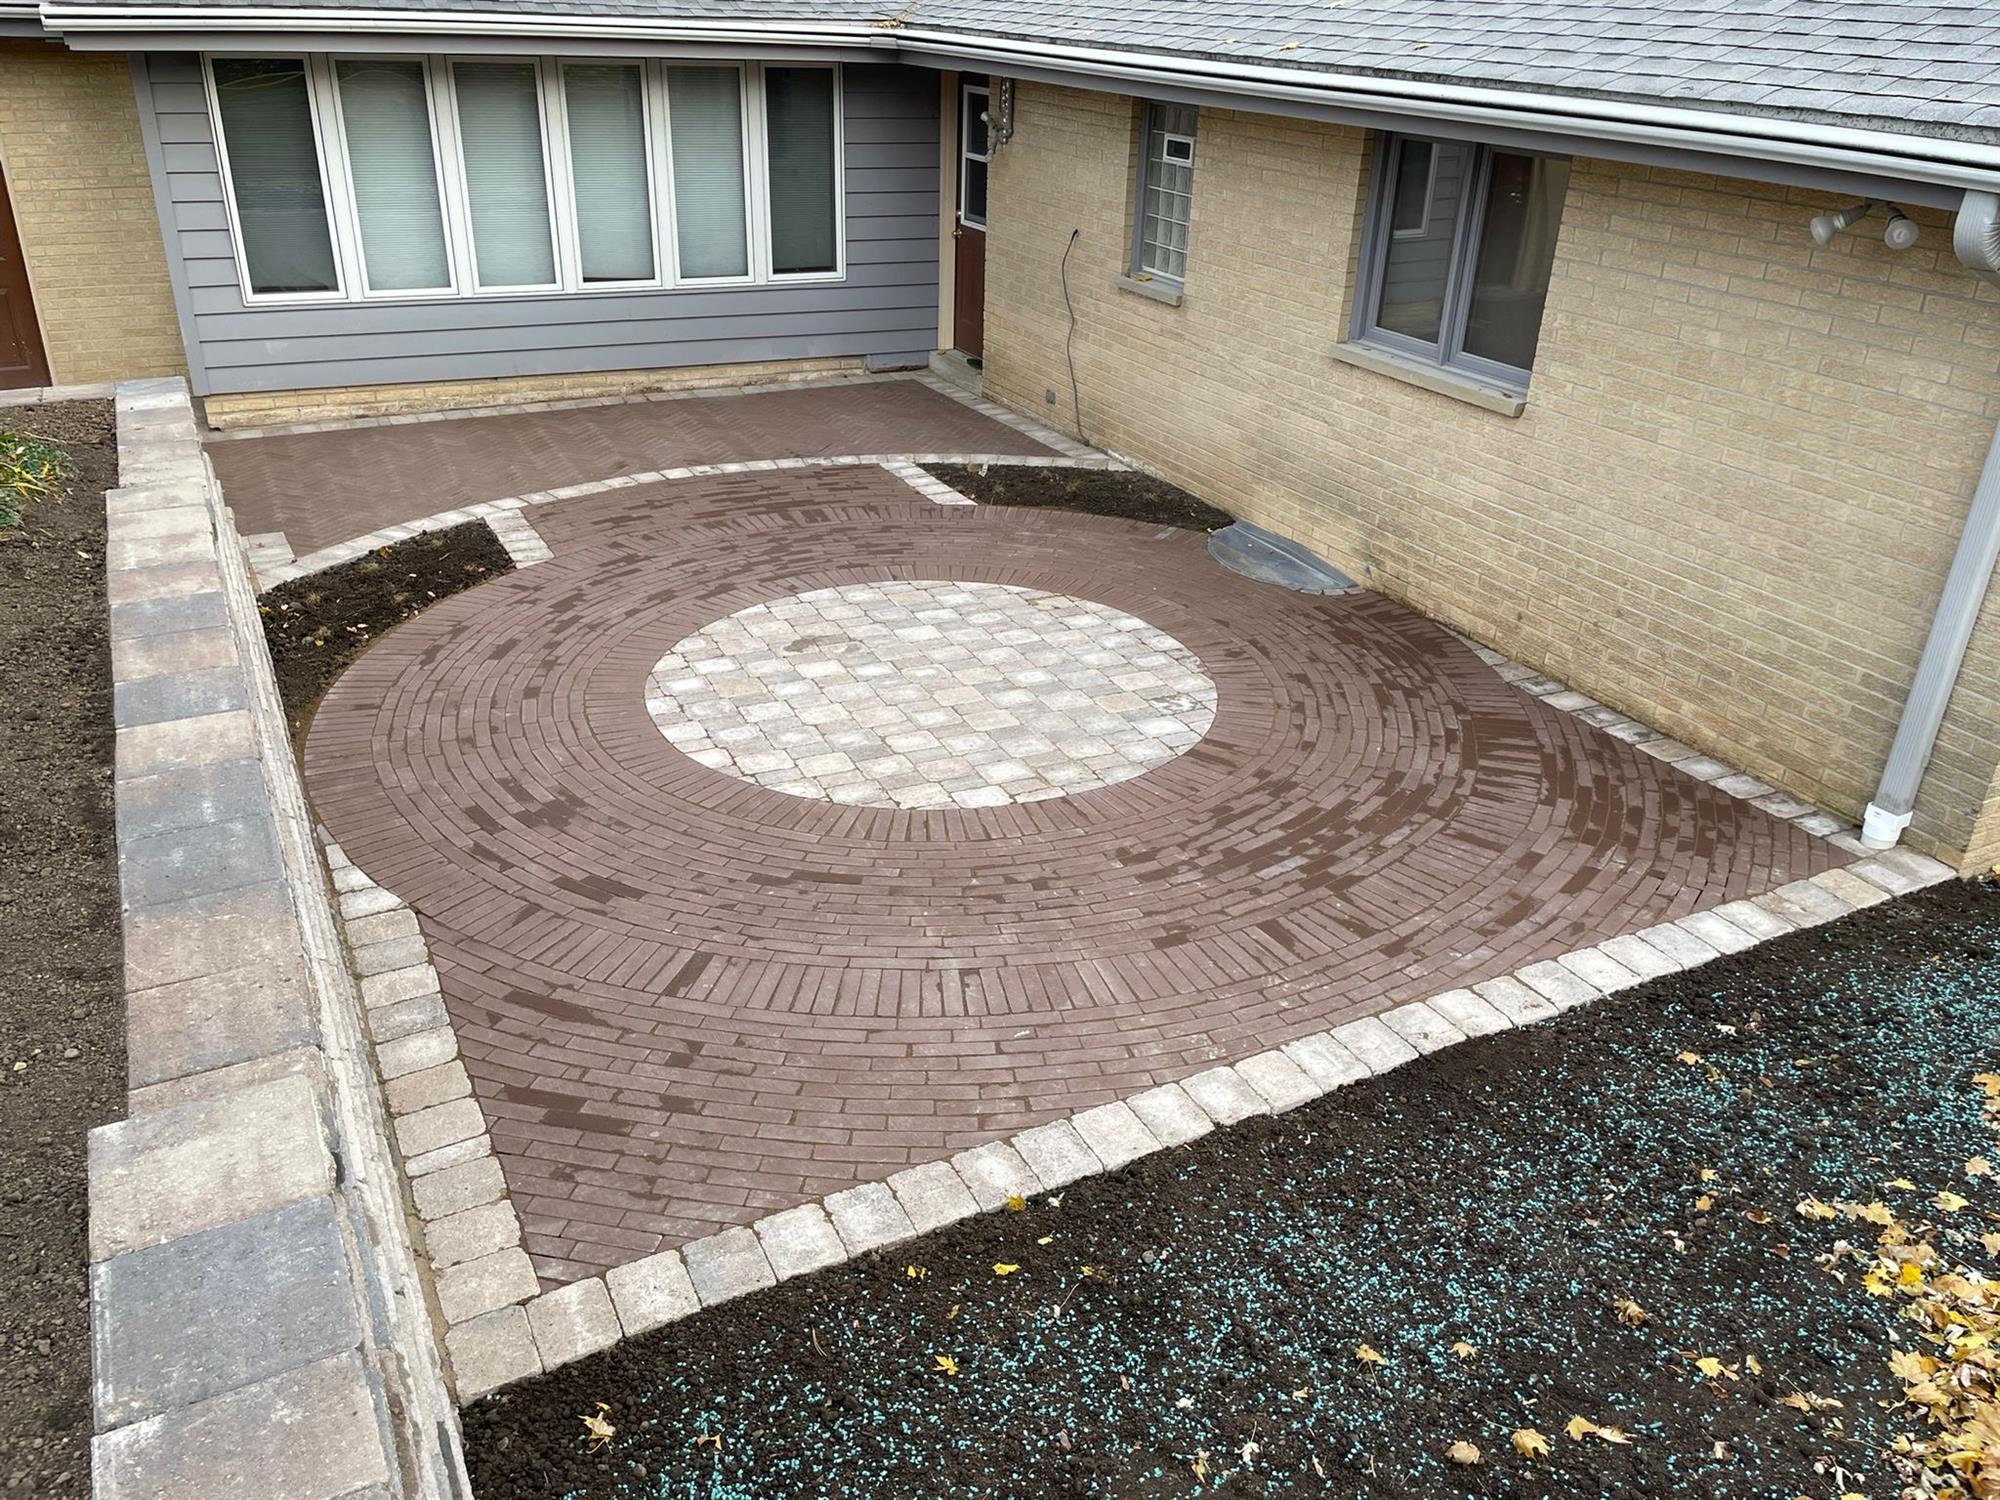 Patio with Circular Pattern with a Retaining Wall Connected to Back Door of the House